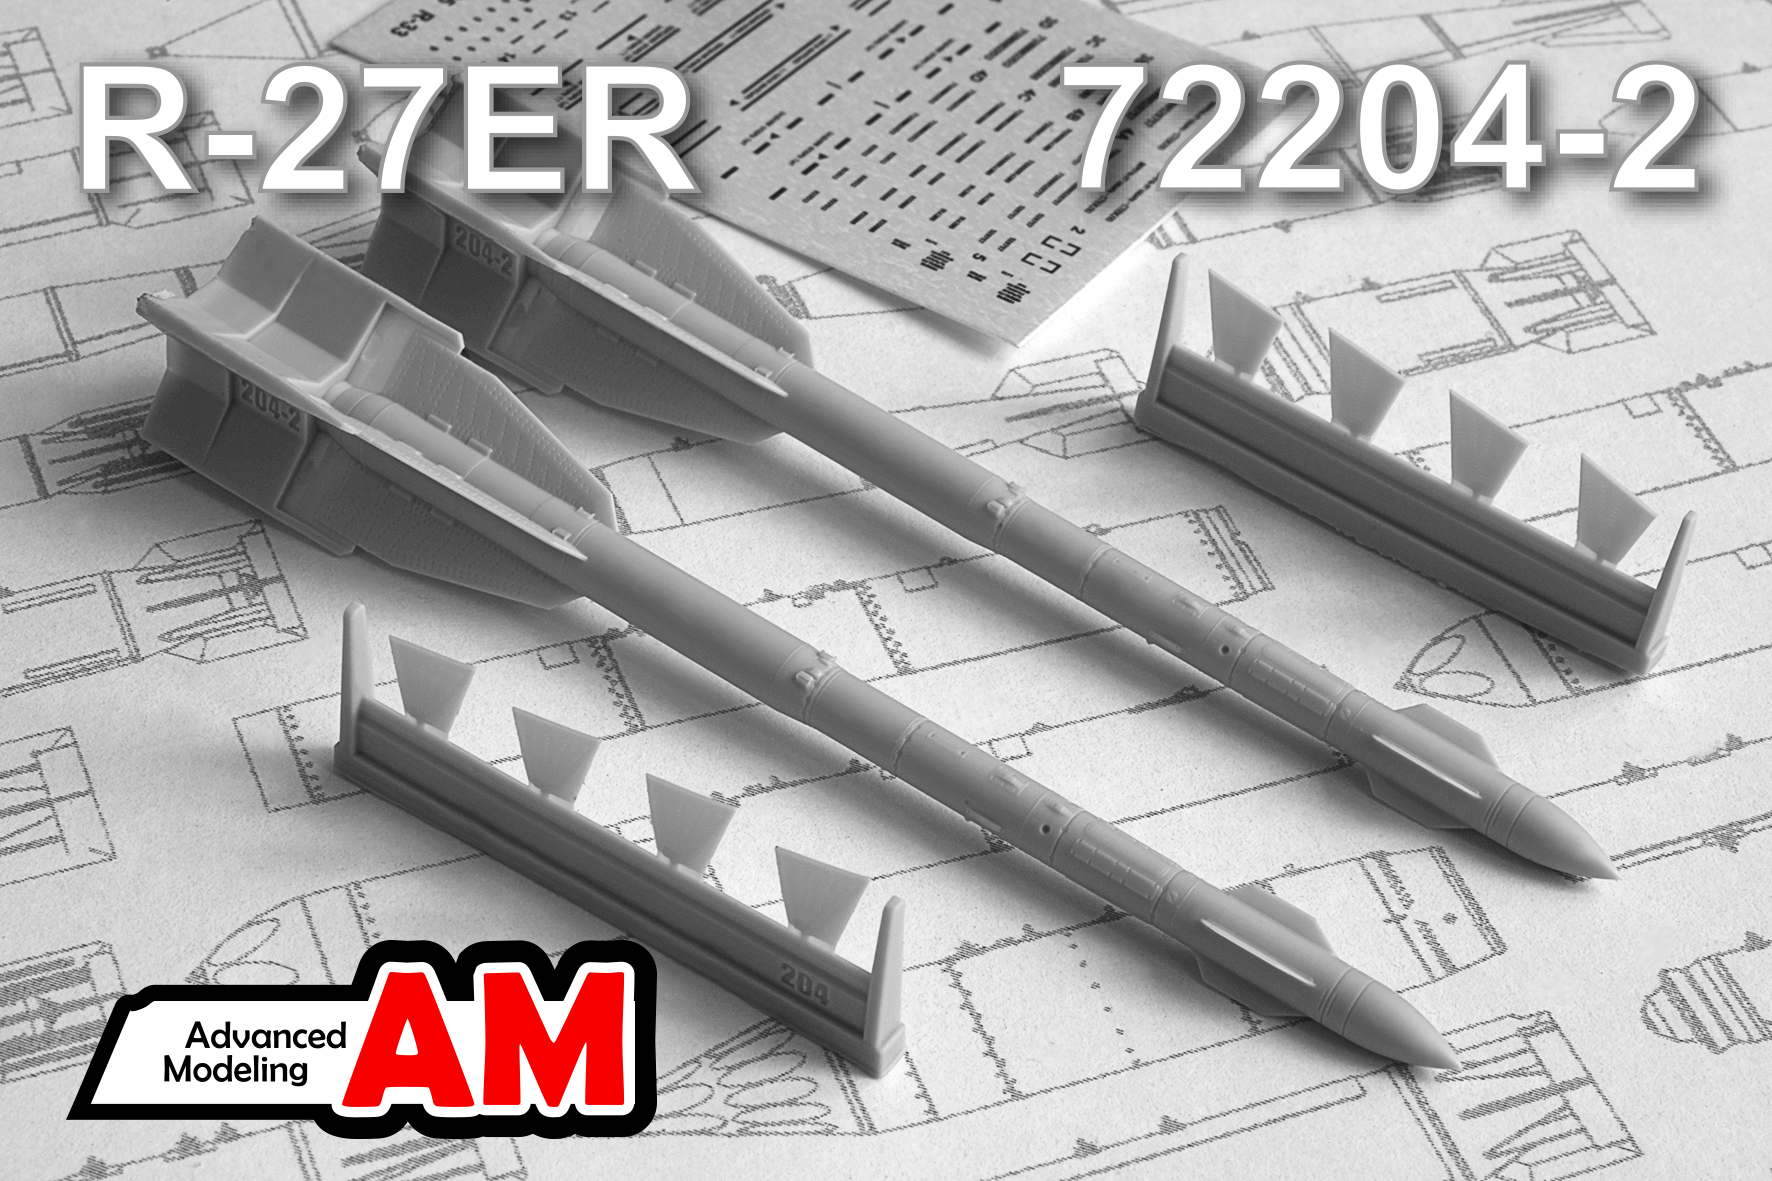 Additions (3D resin printing) 1/72 R-27ER Air to Air missile (Advanced Modeling) 